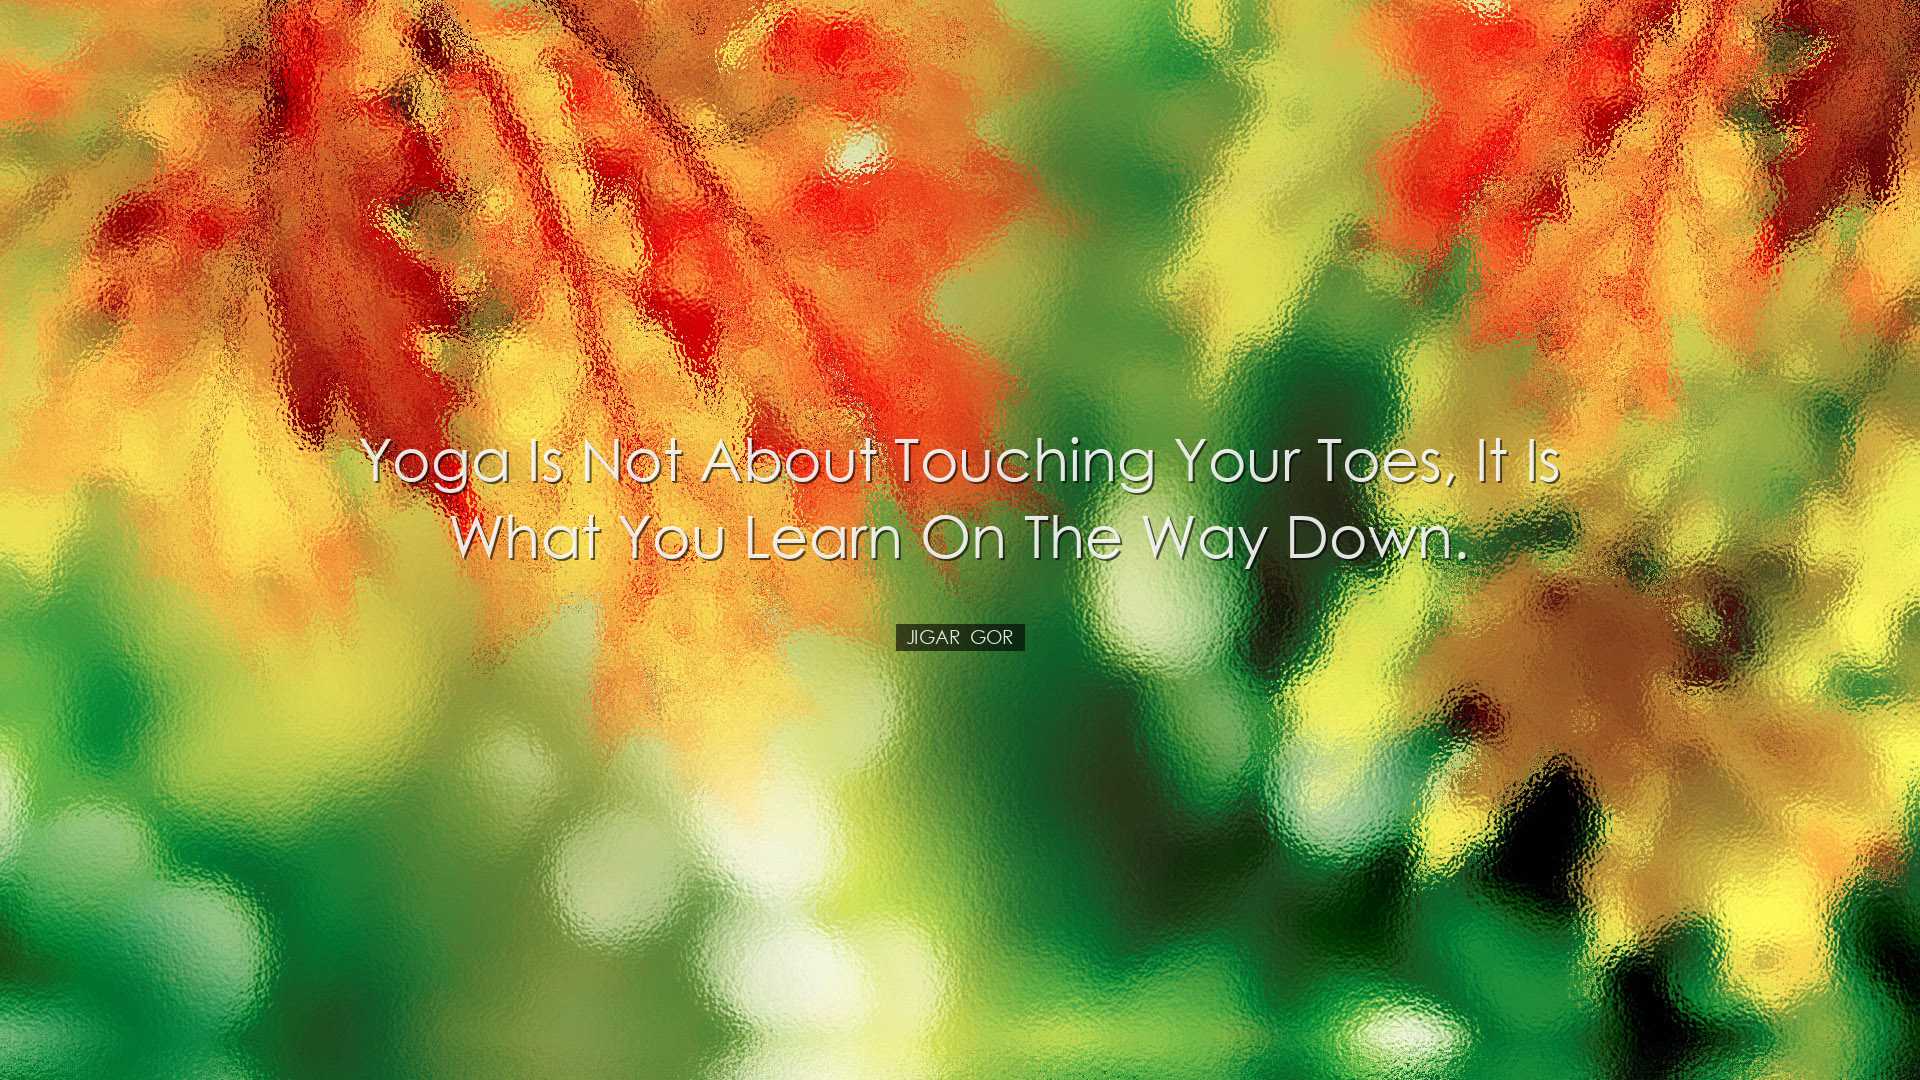 Yoga is not about touching your toes, it is what you learn on the